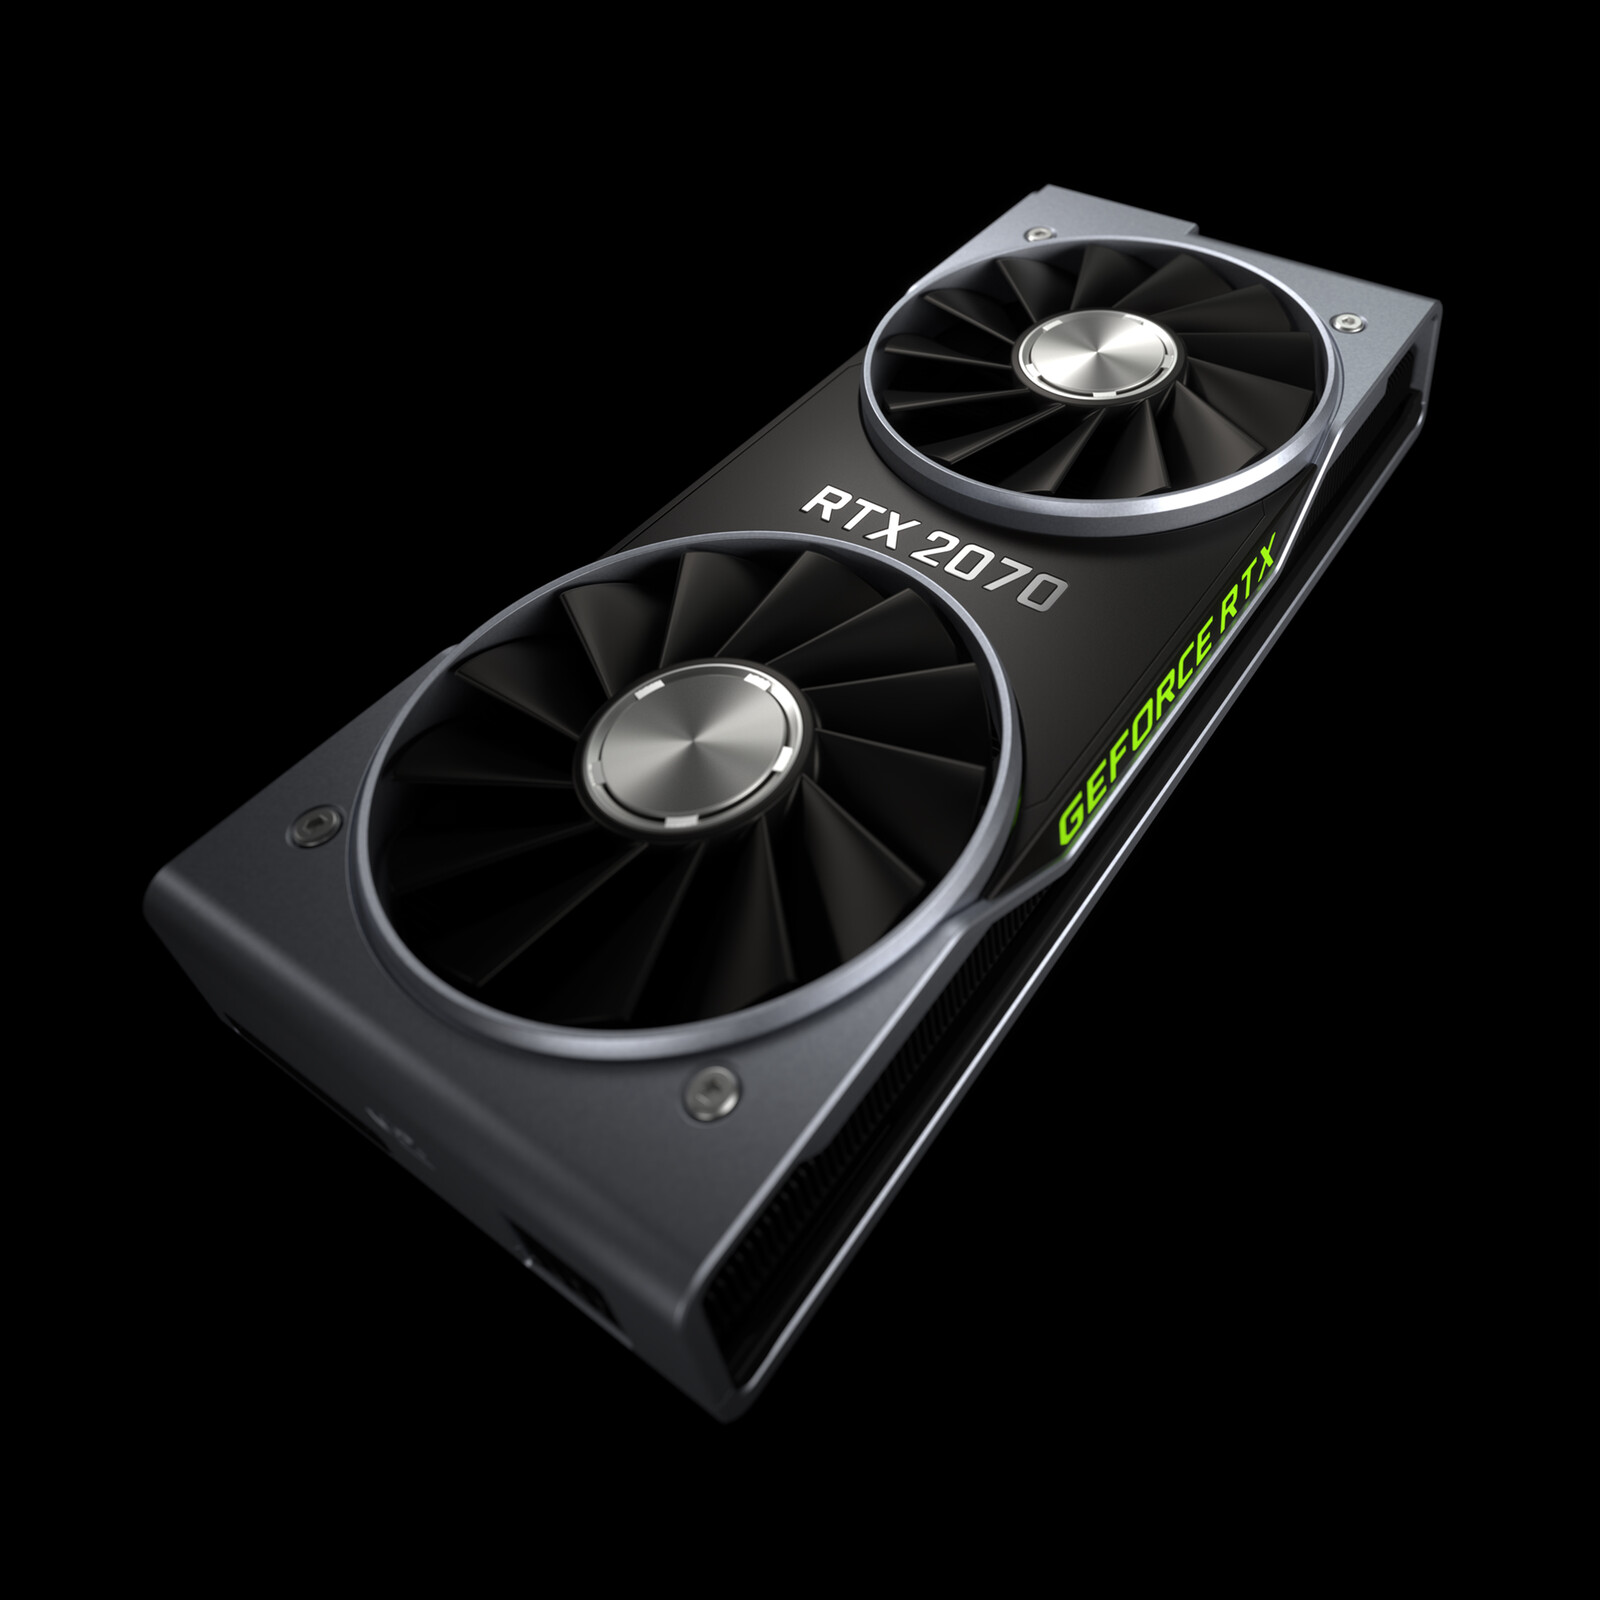 Nvidia confirms launch of GeForce RTX 2070 October 17 for $499 - NotebookCheck.net News